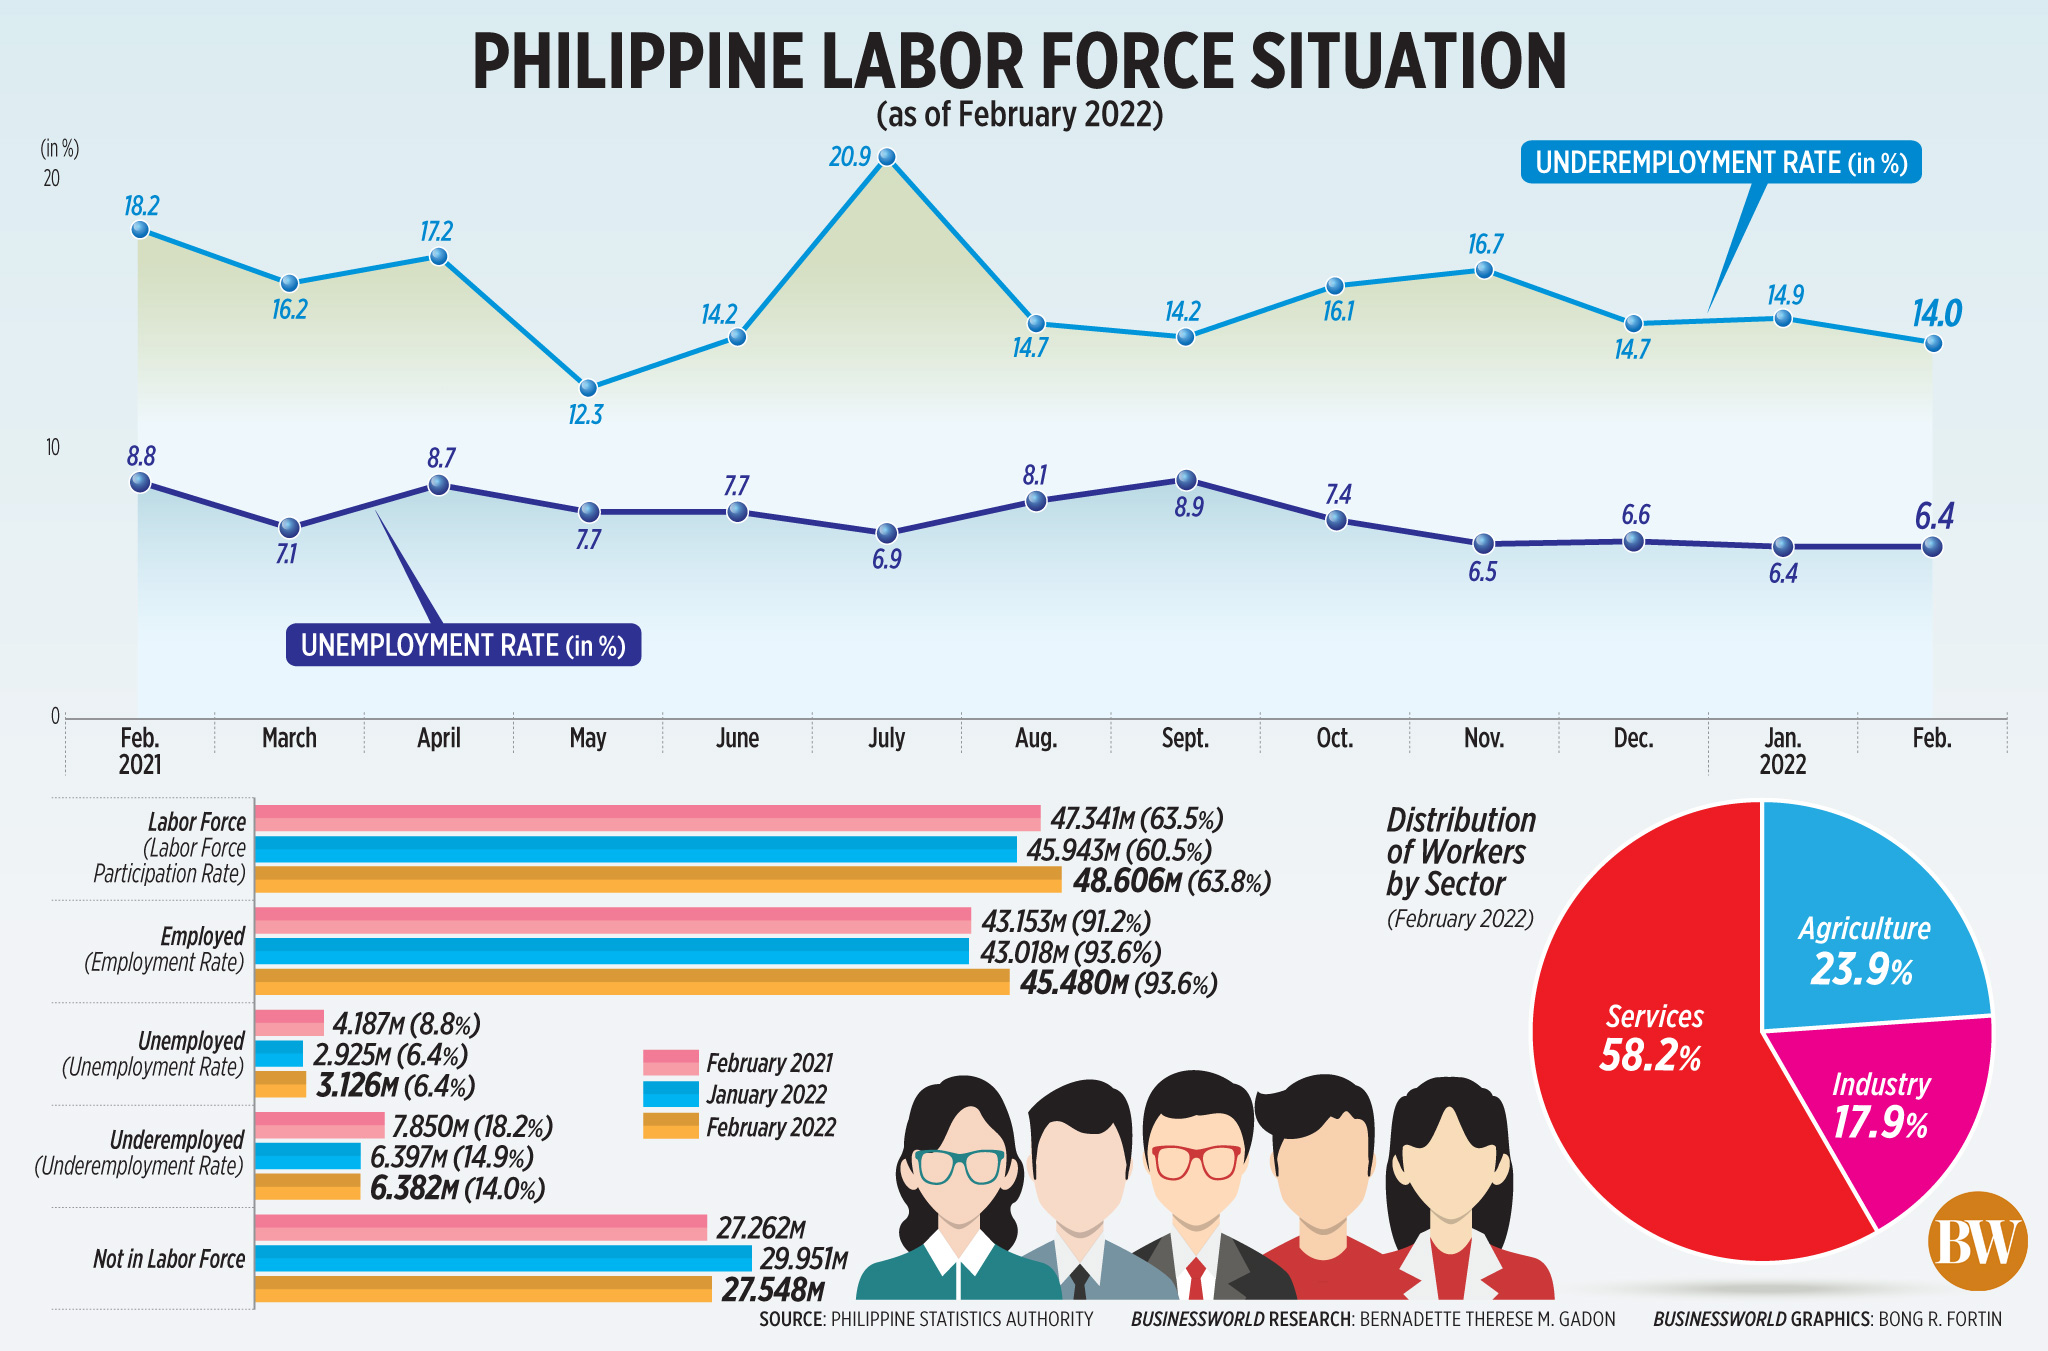 Philippine labor force situation (Feb. 2022)